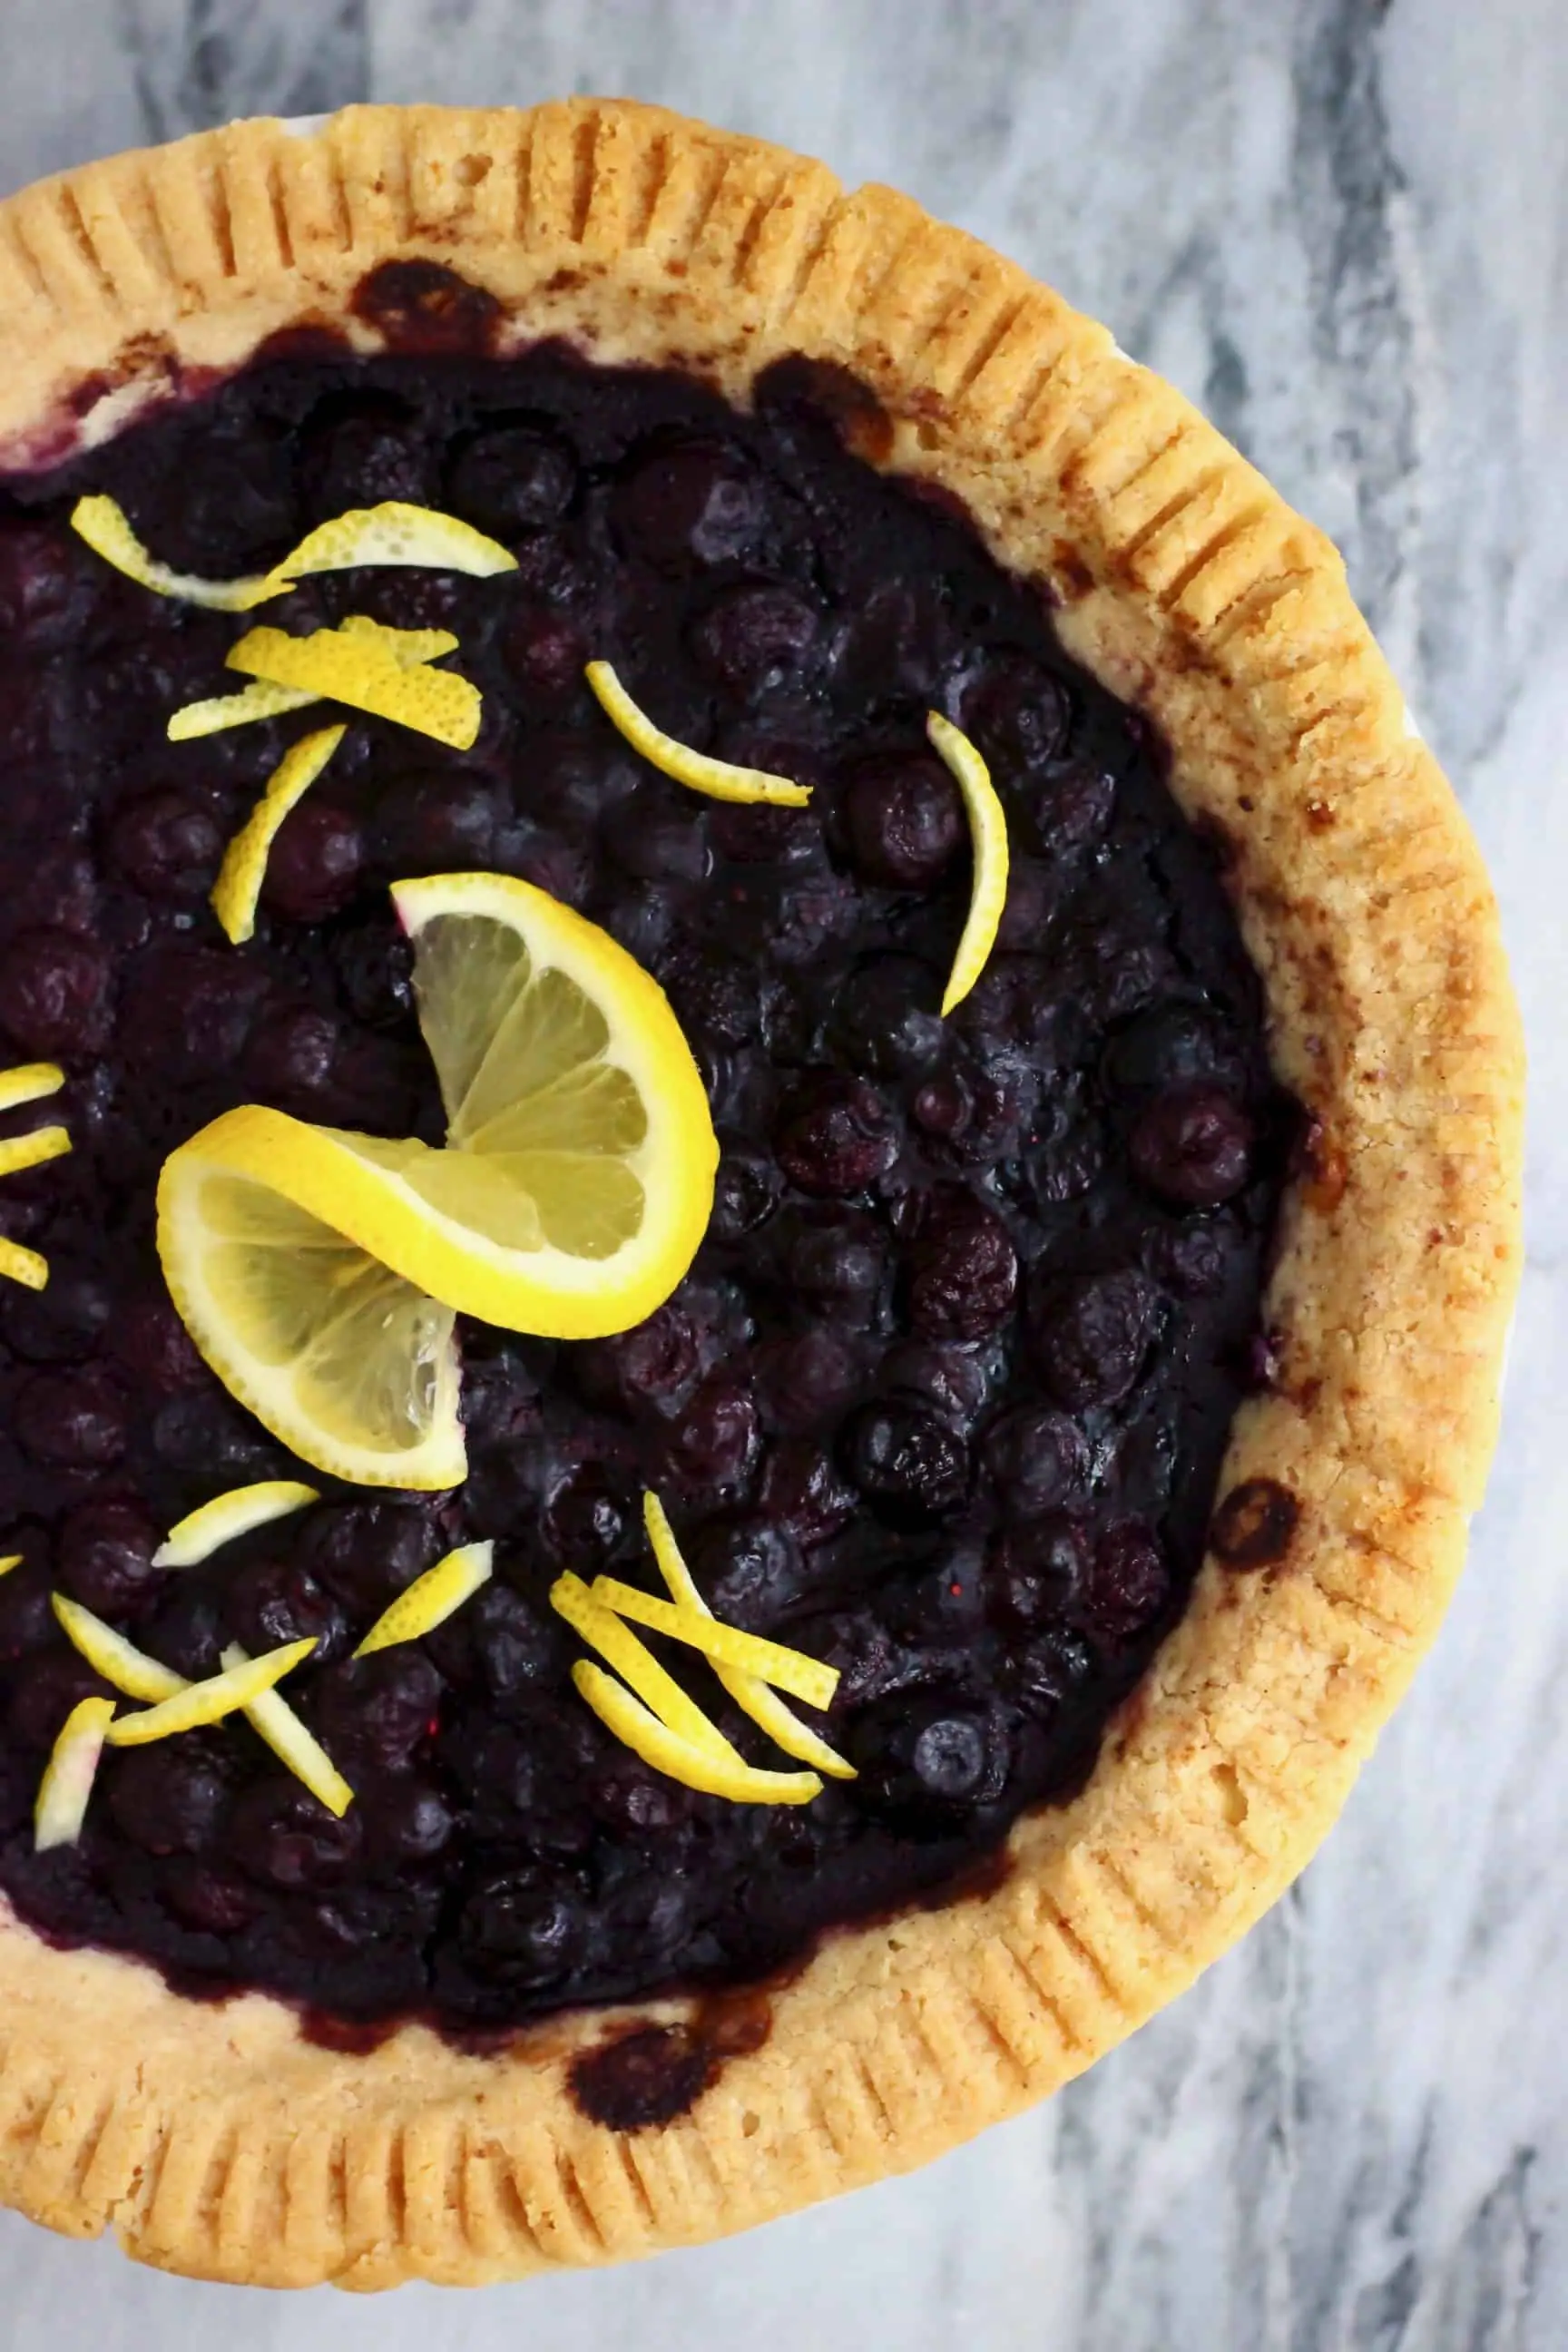 A vegan blueberry pie decorated with lemon peel and a slice of lemon against a marble background